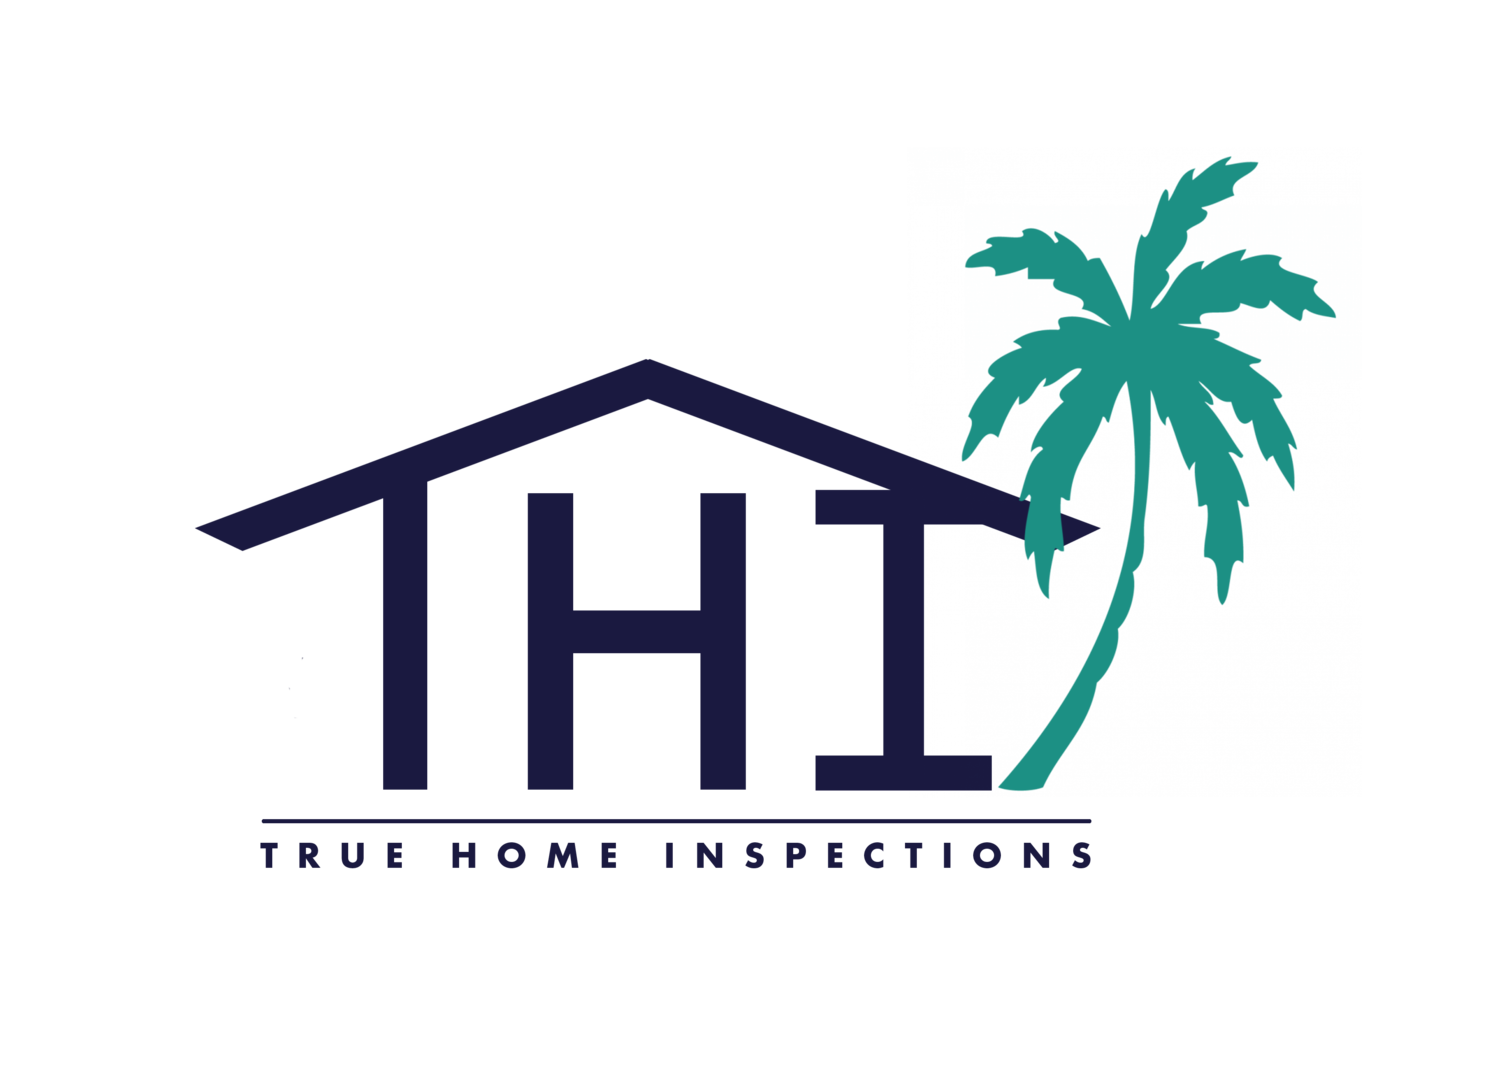 True Home Inspections